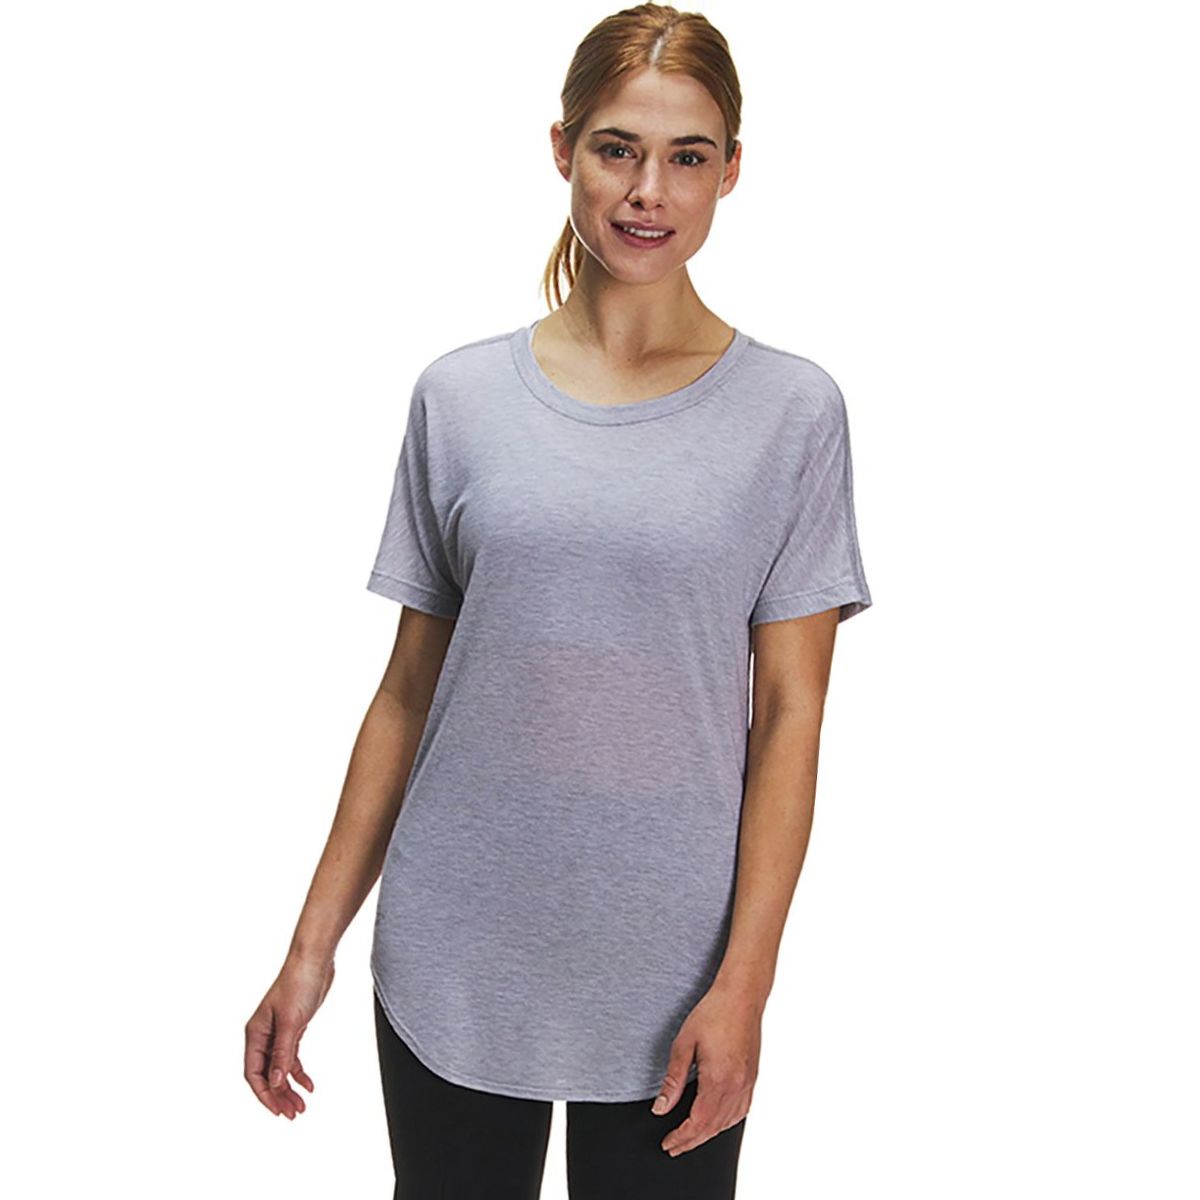 The North Face Workout Short-Sleeve Top - Women's